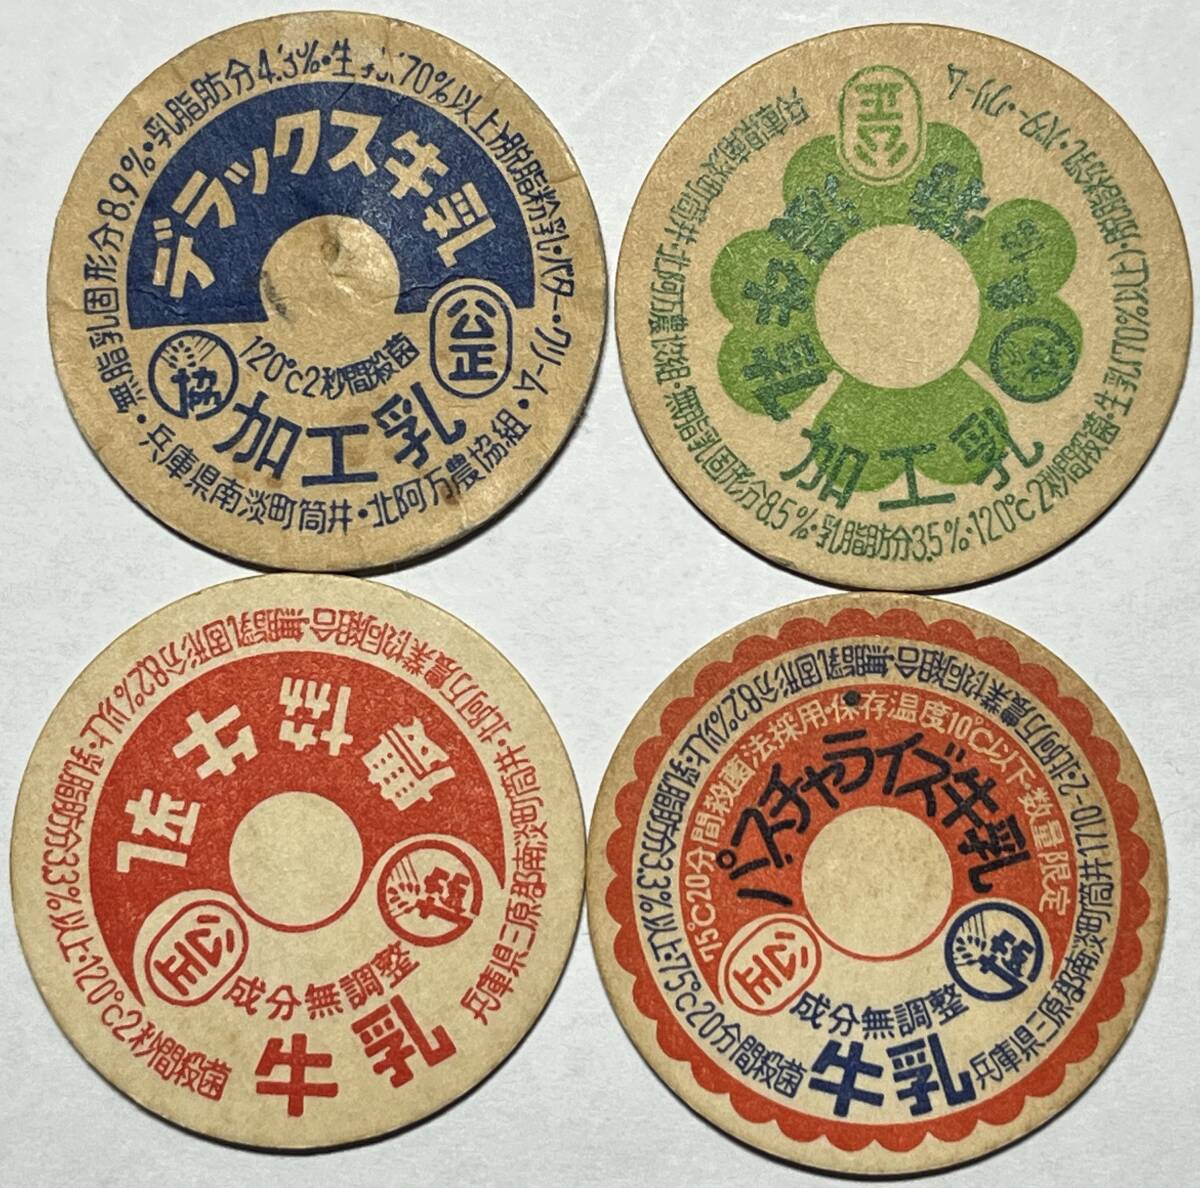 30 Hyogo 12 north . ten thousand agriculture . same collection .